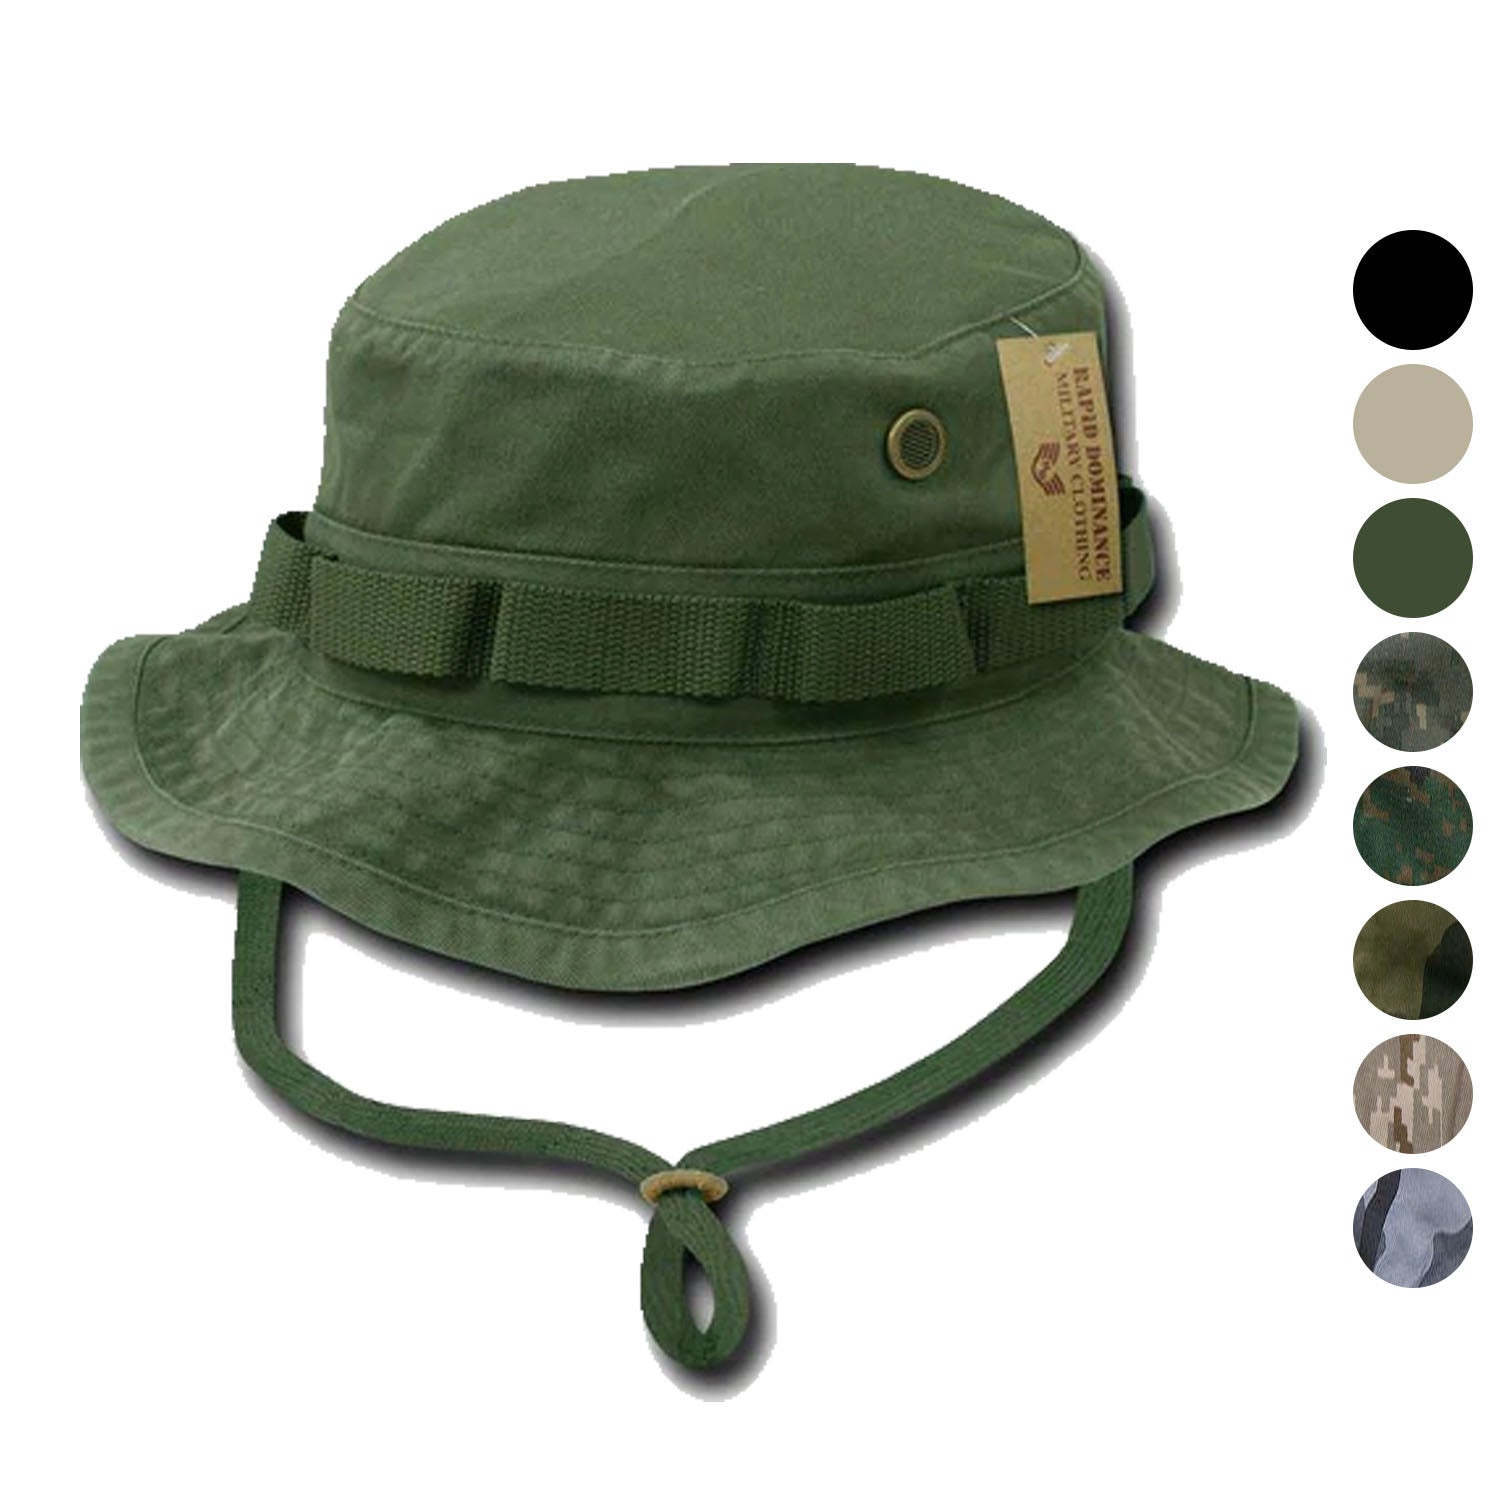 Wholesale Cheap Military Boonie Caps - Buy in Bulk on